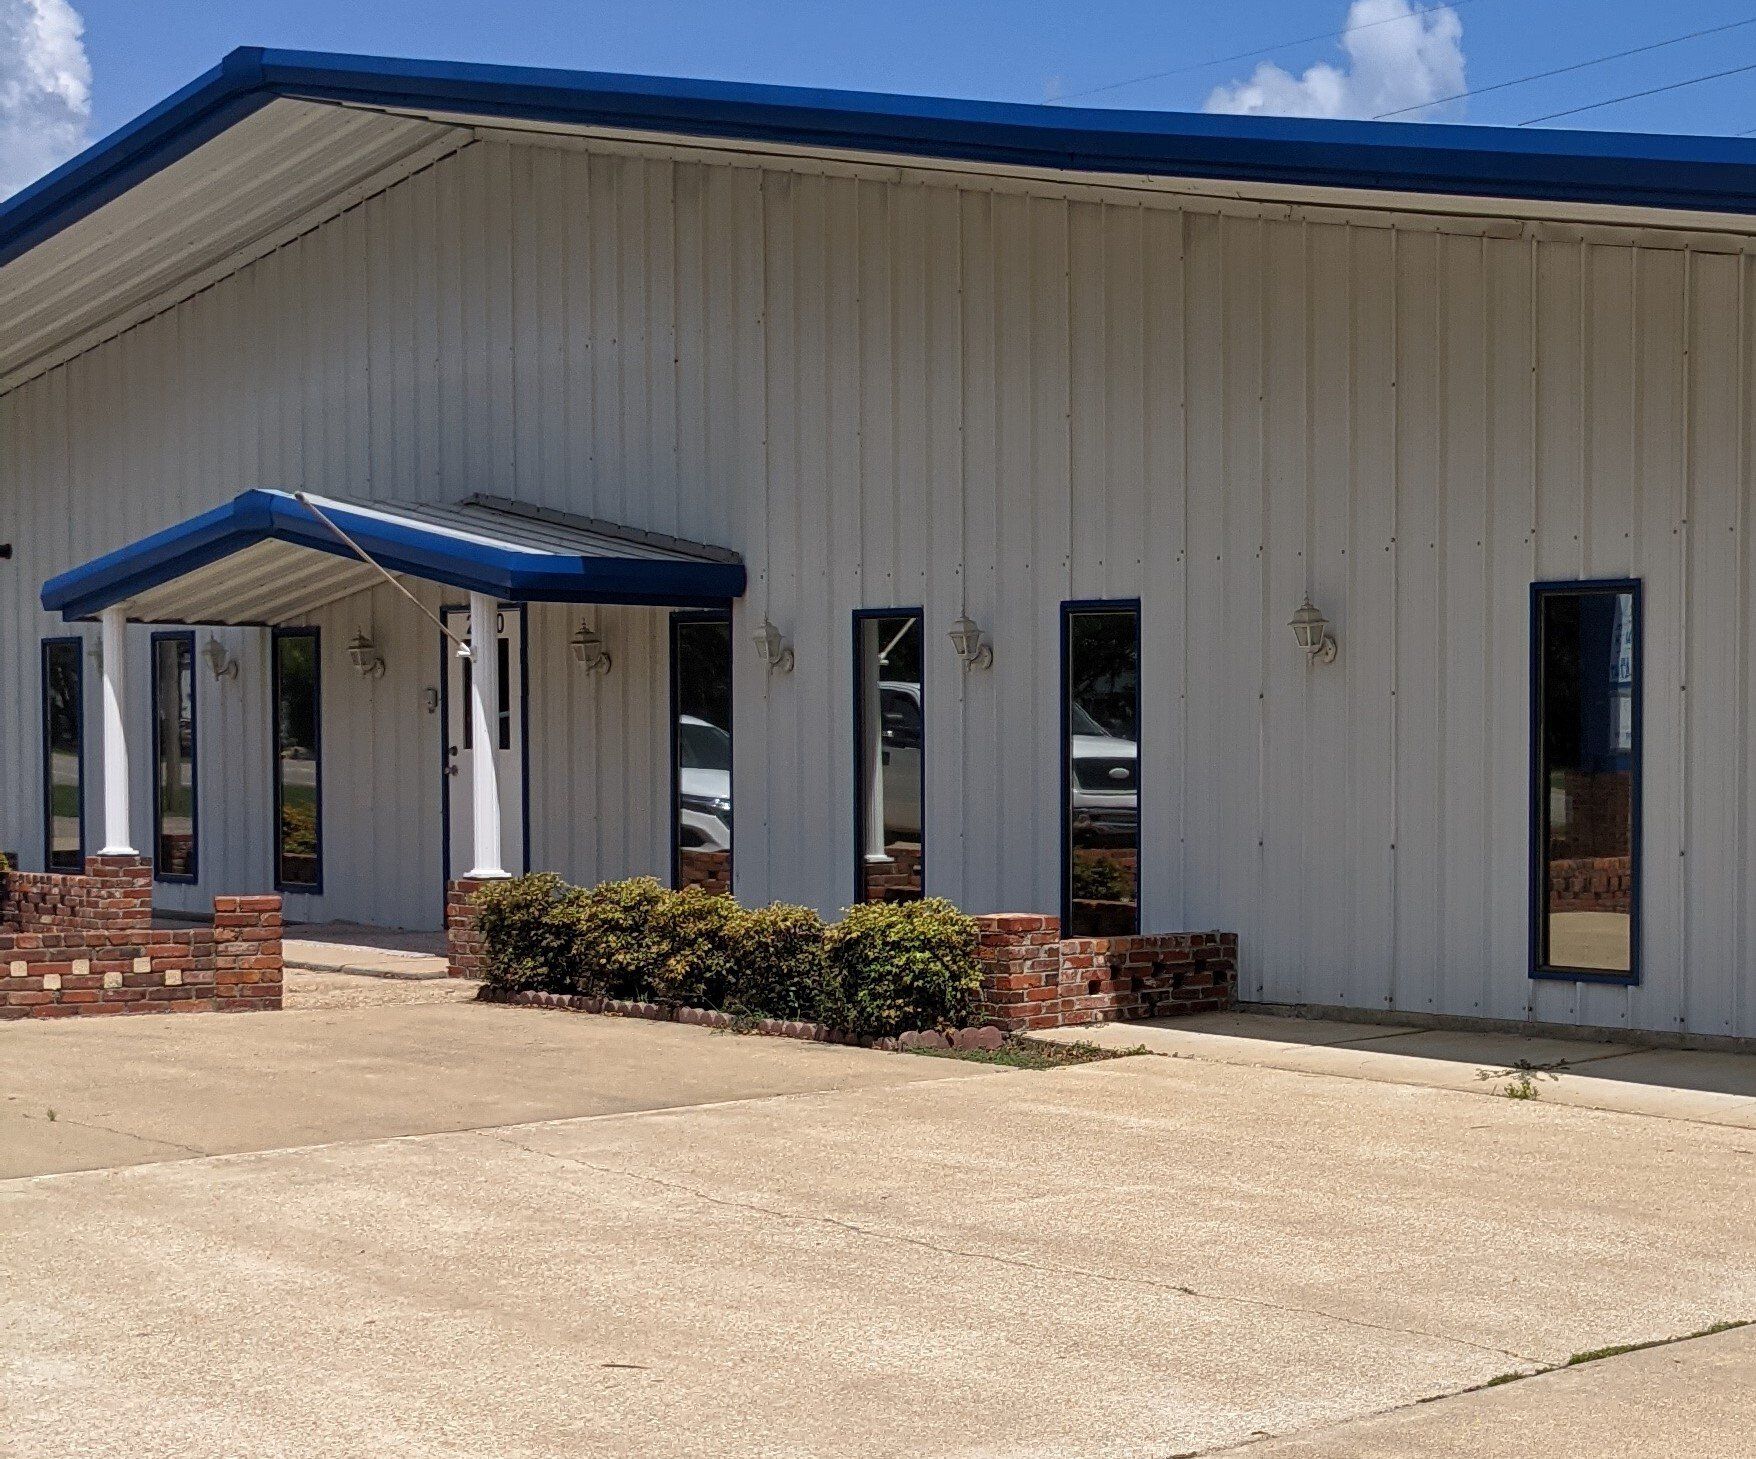 store window tinting in AL - Heat & Bright Sun were out of control inside this office in Millbrook Alabama.